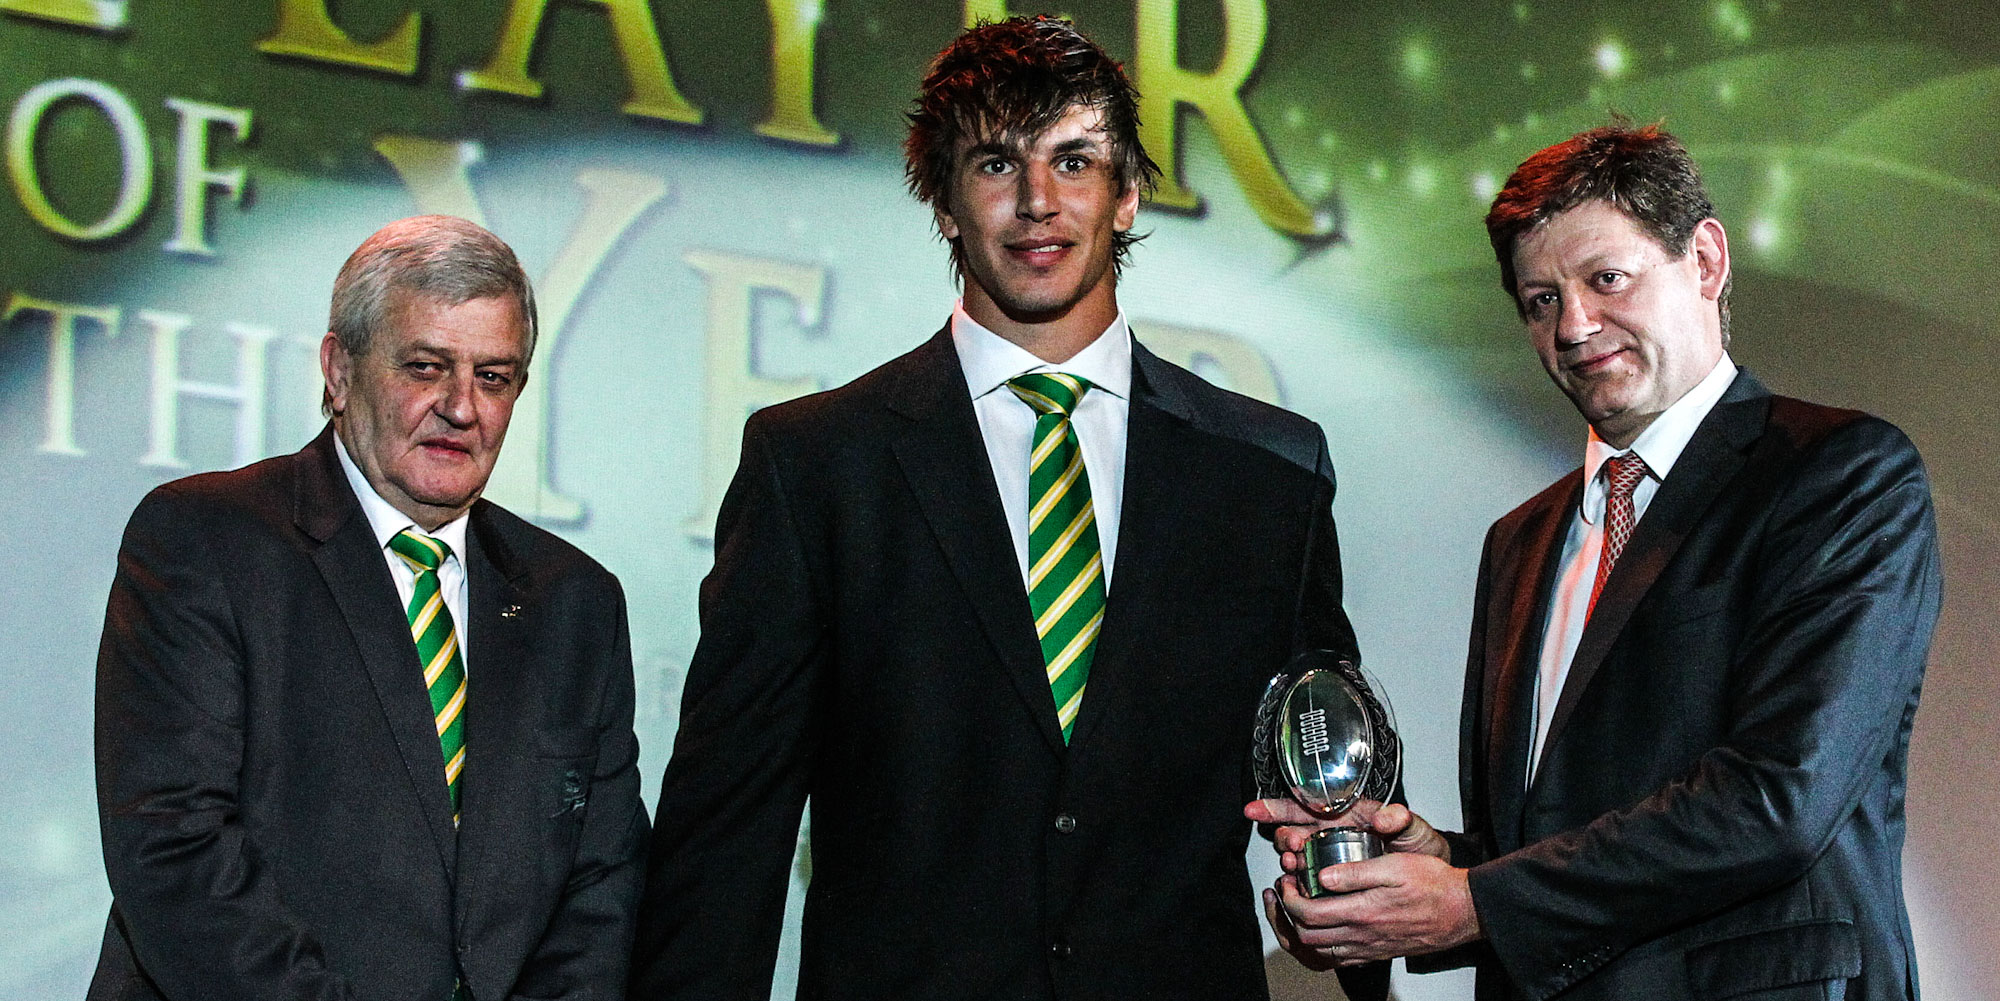 Eben Etzebeth was named SA Rugby Young Player of the Year in 2012, the year he made his Springbok debut.